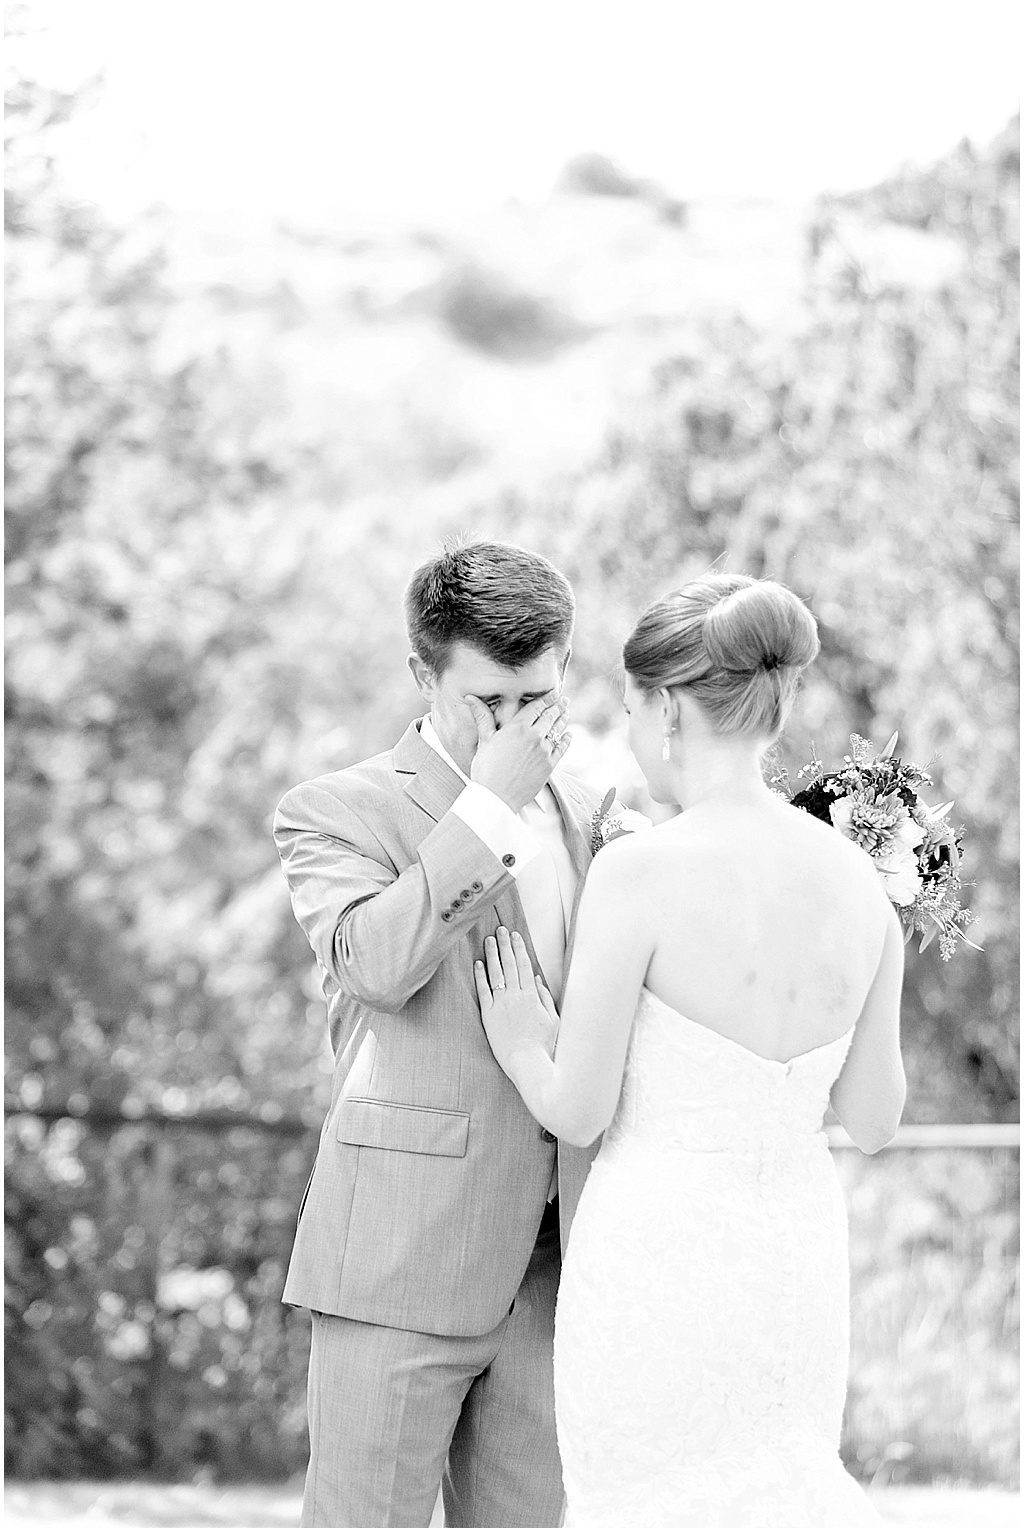 View More: http://maryfieldsphotography.pass.us/gibson-wedding-9-5-15